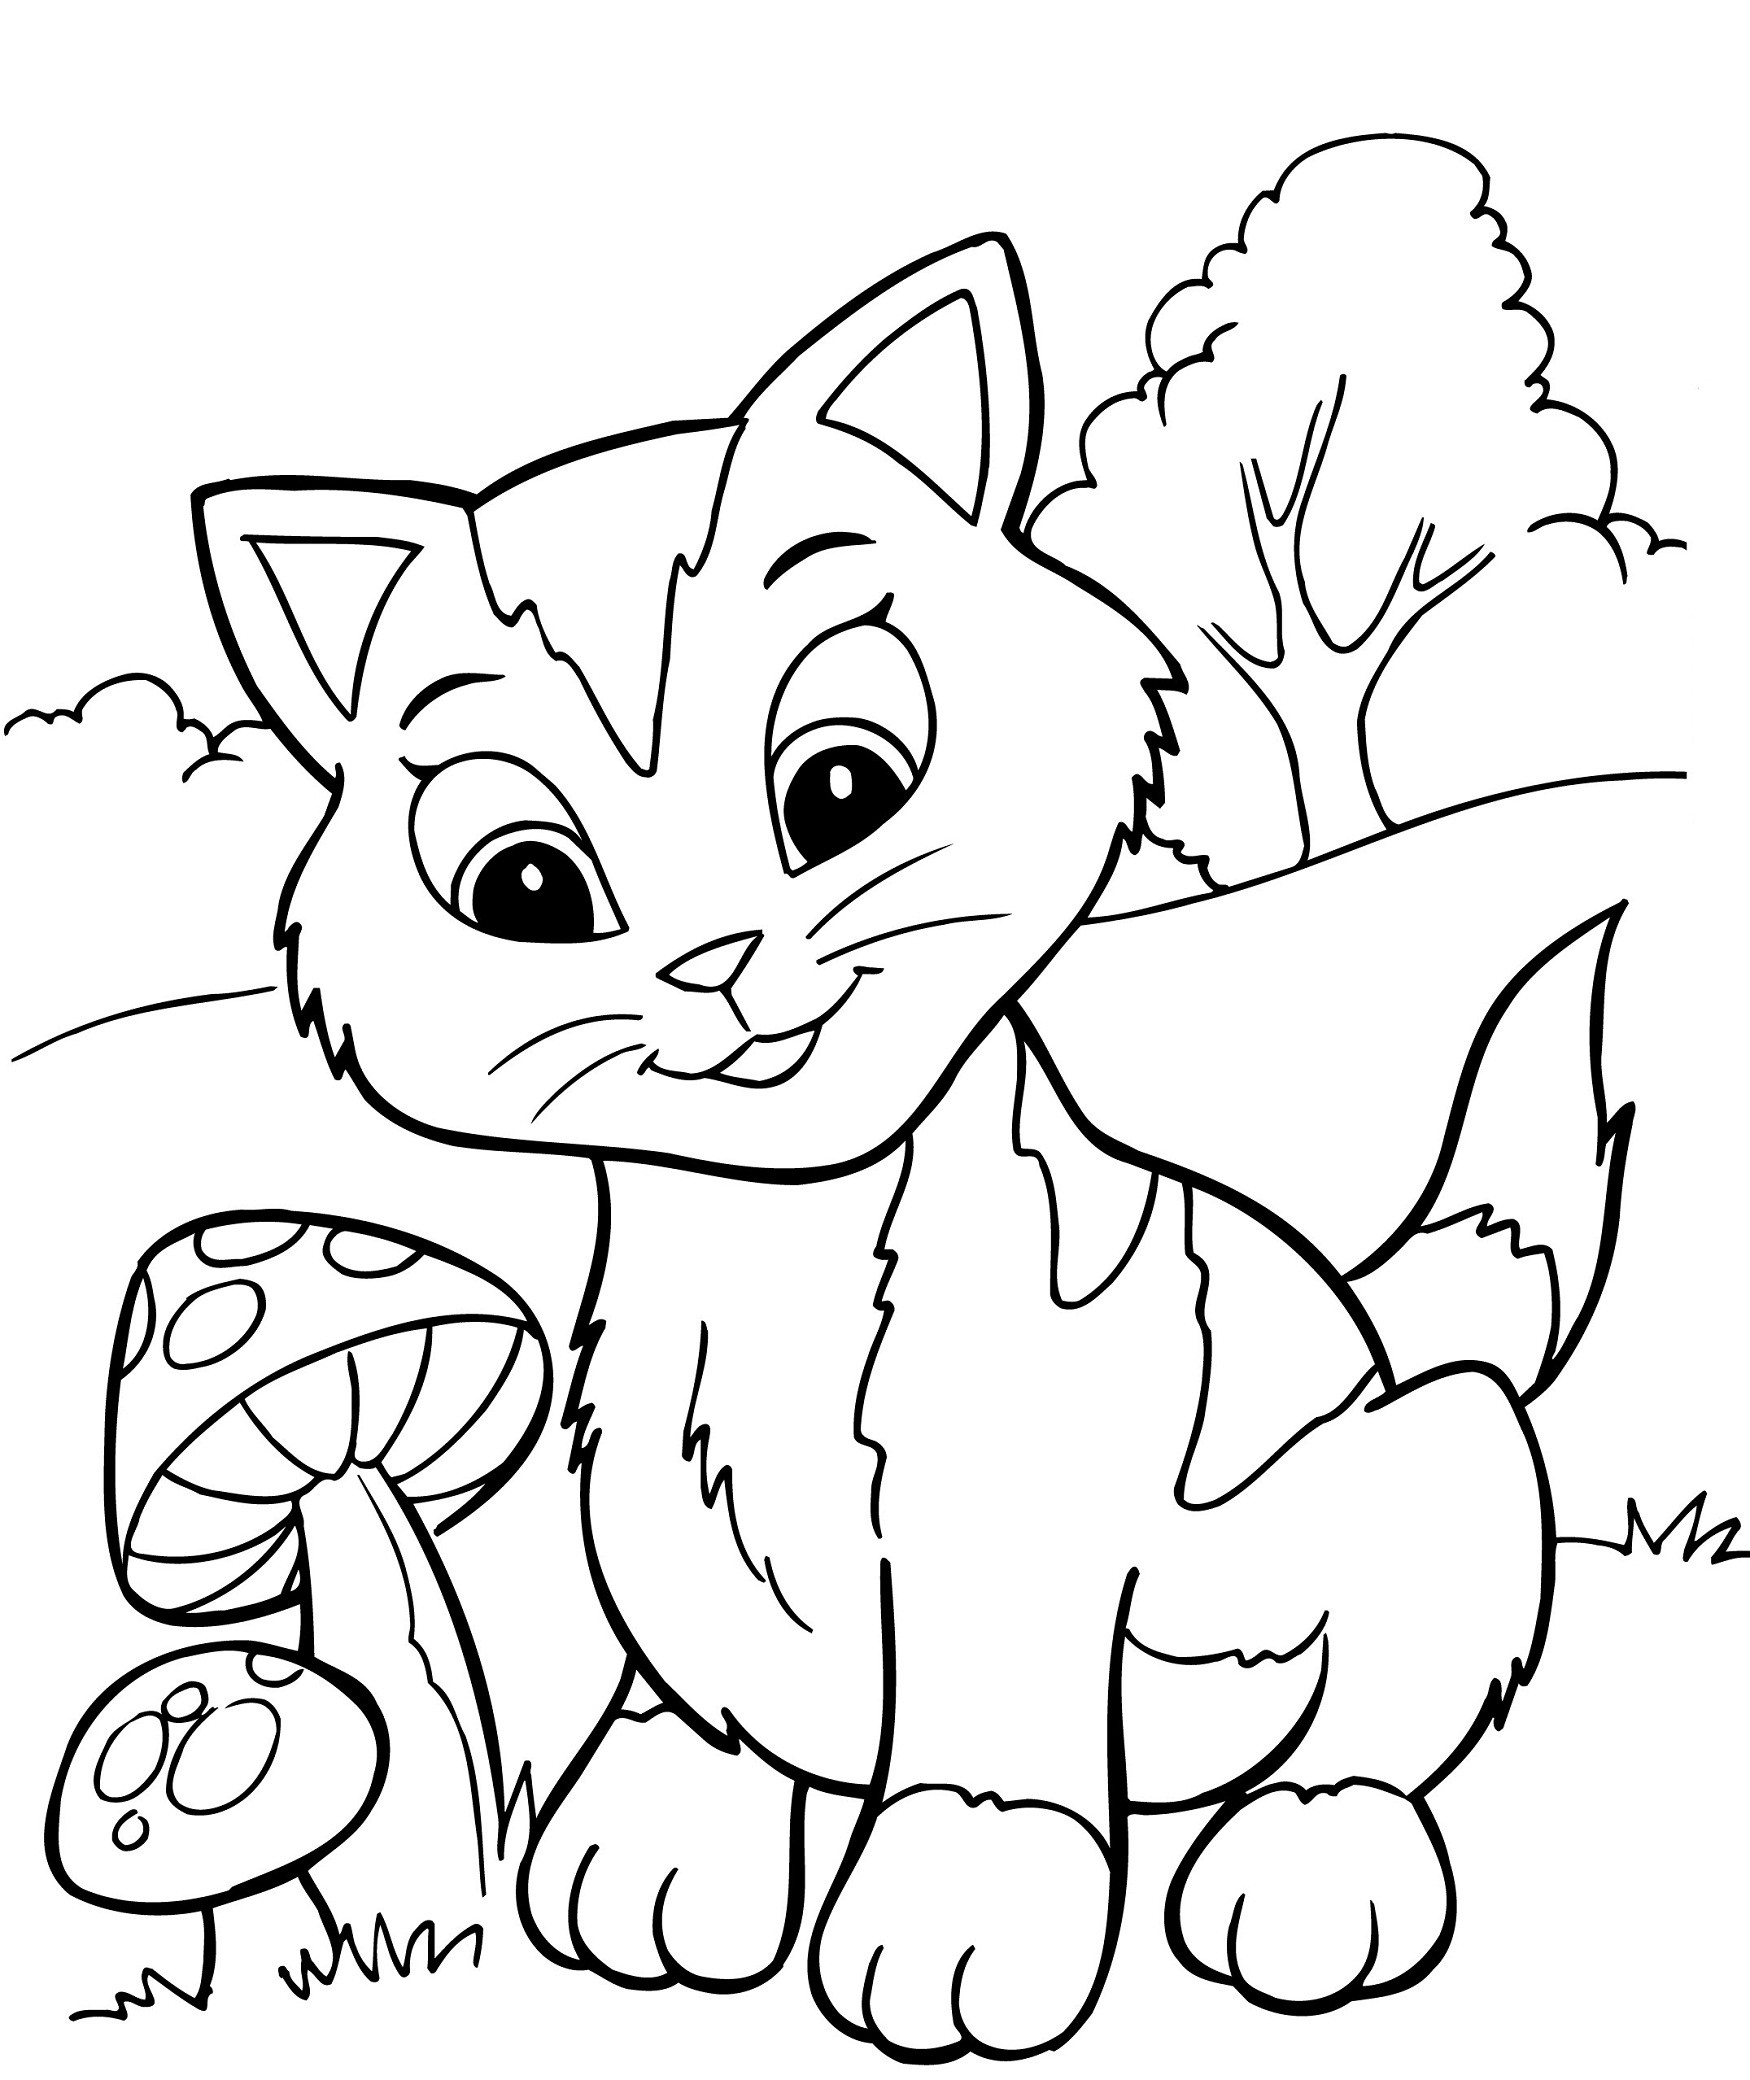 Printable Coloring Pages For Kids.Pdf
 Printable Coloring Book Pages for Kids Gallery